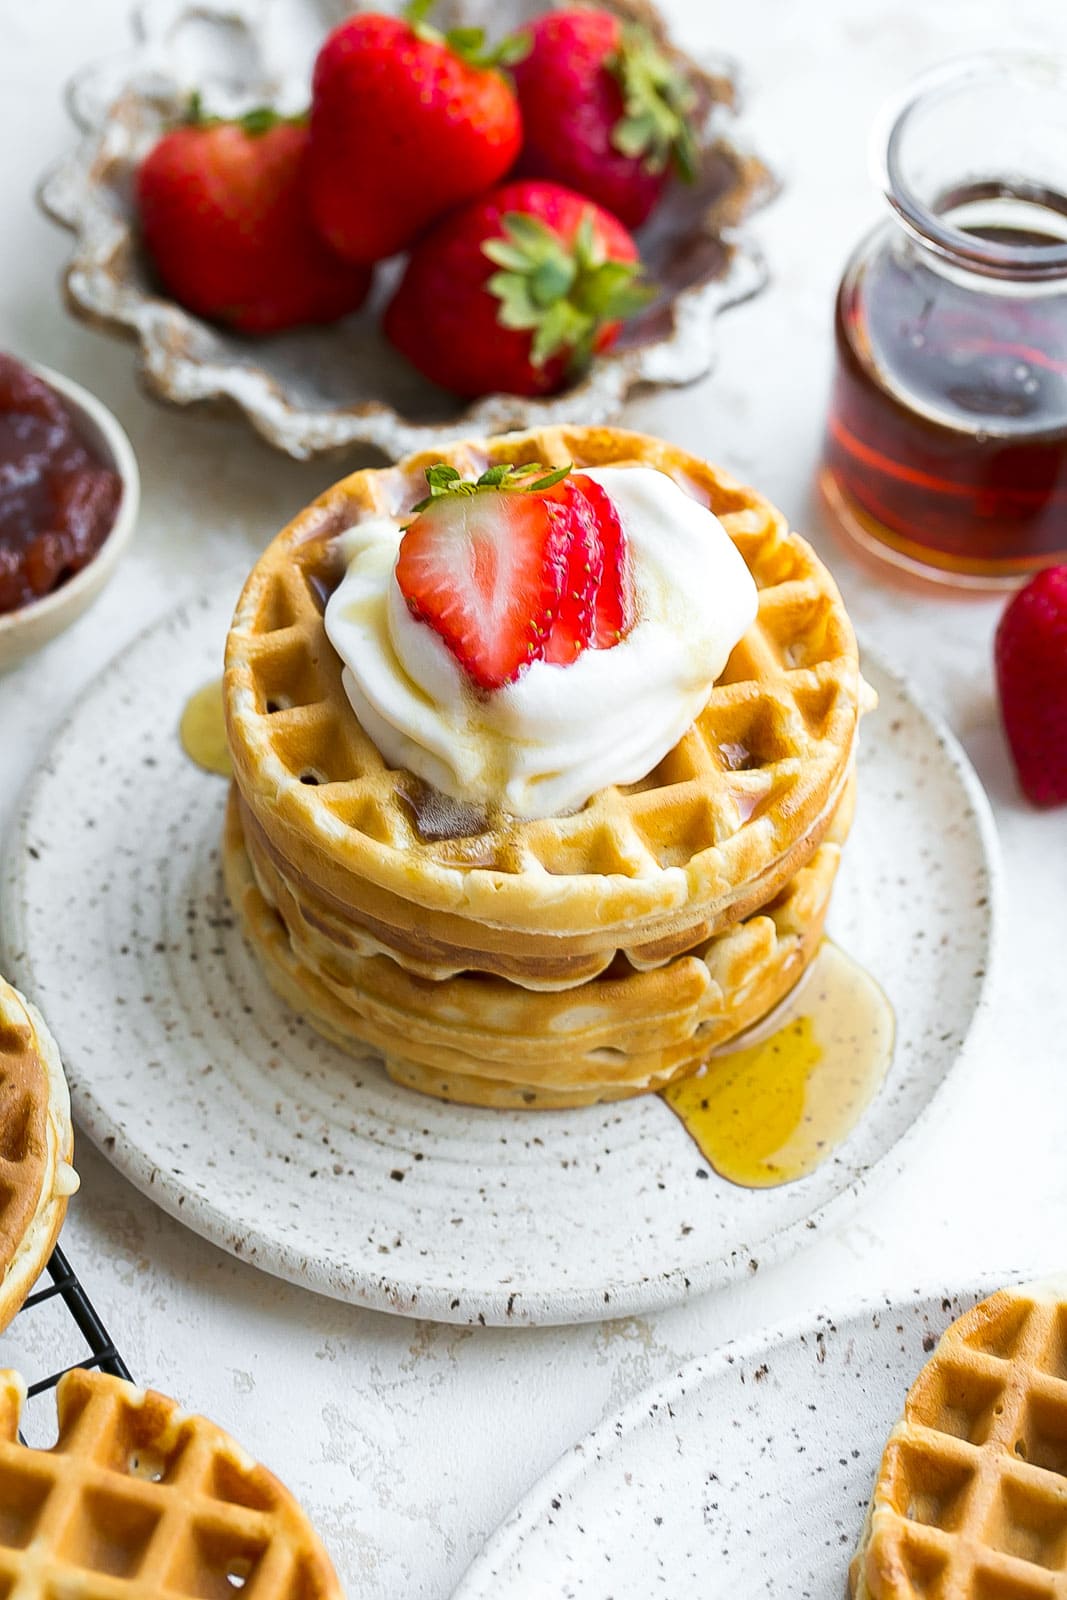 Waffles on a plate with maple syrup.